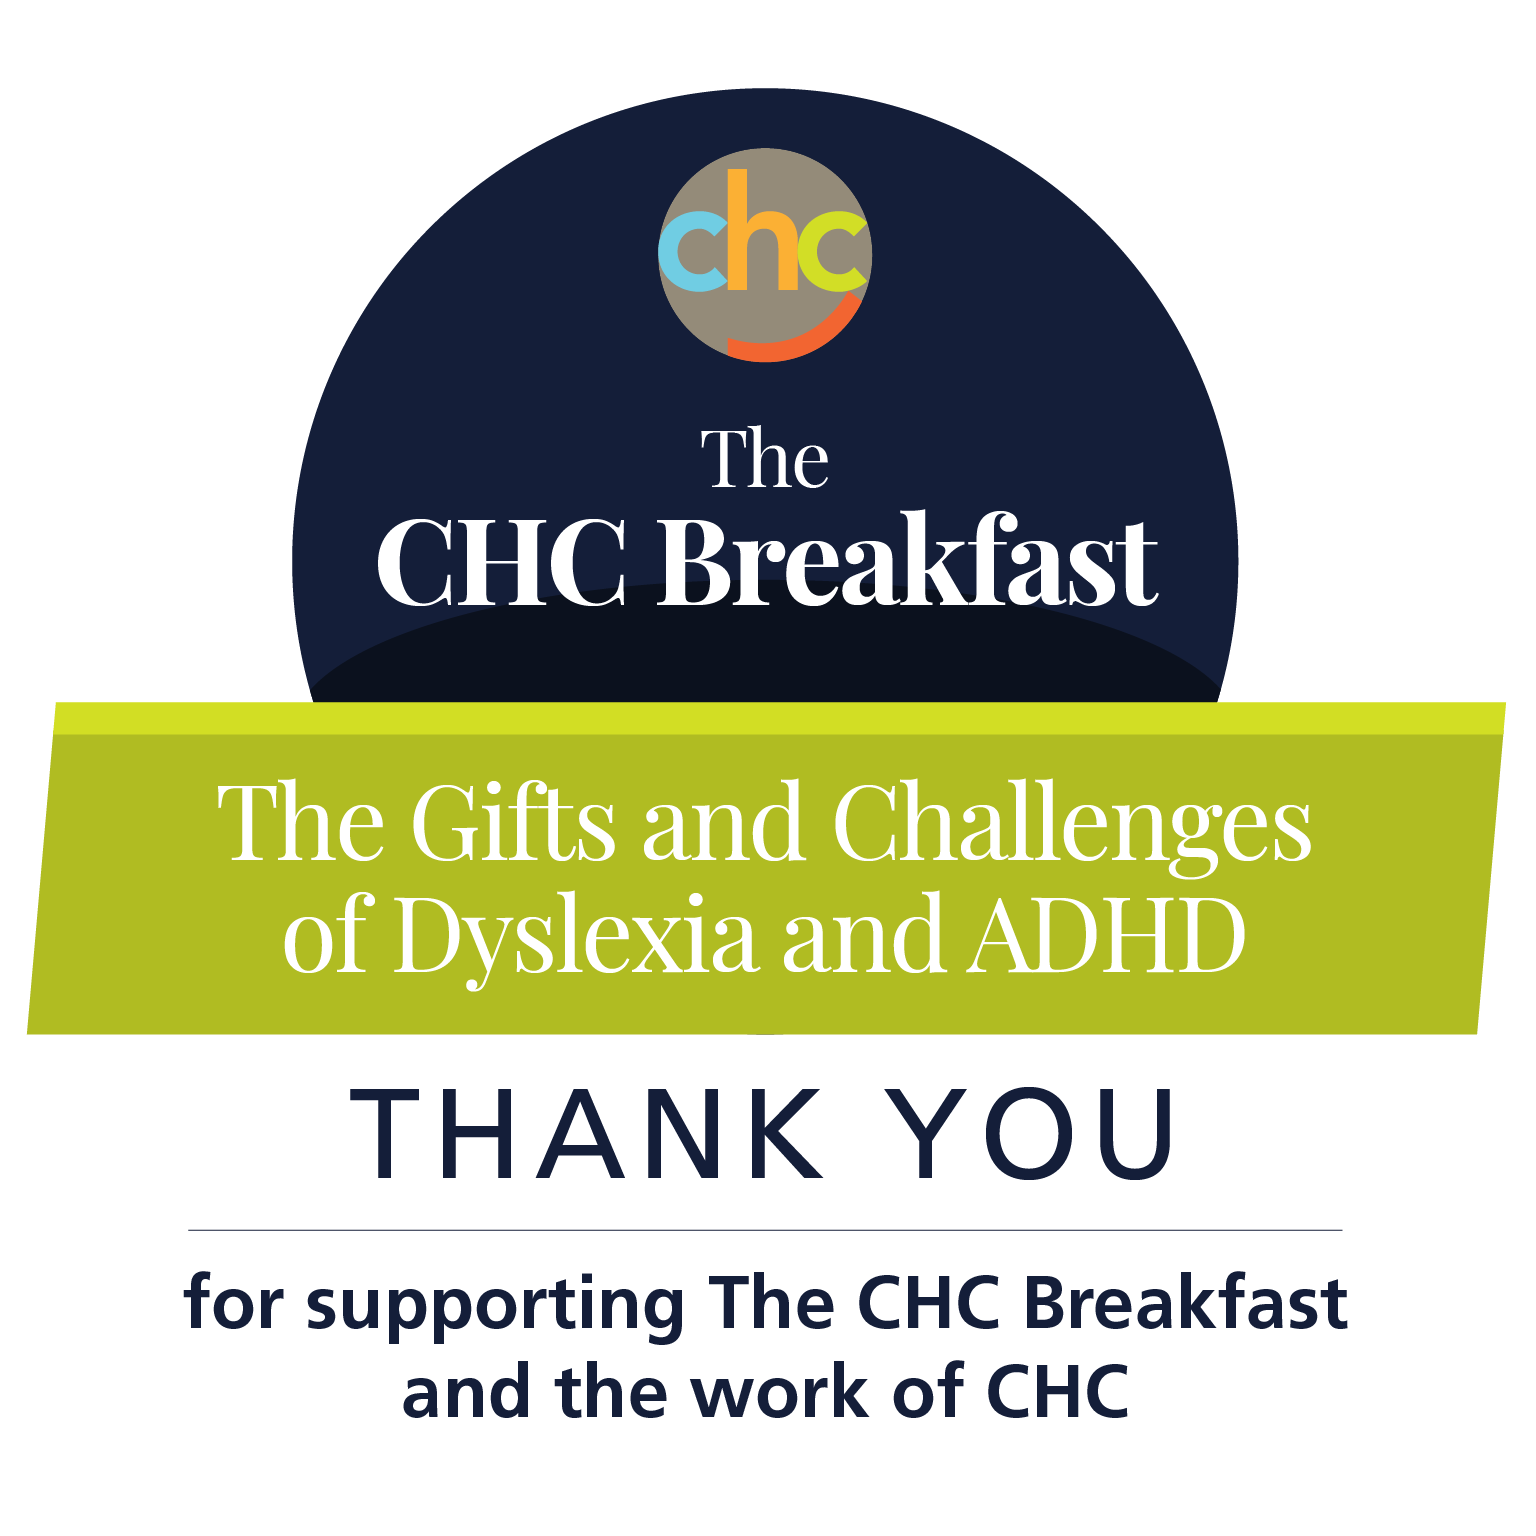 Thank you for supporting The CHC Breakfast, Thursday, March 5, 2020